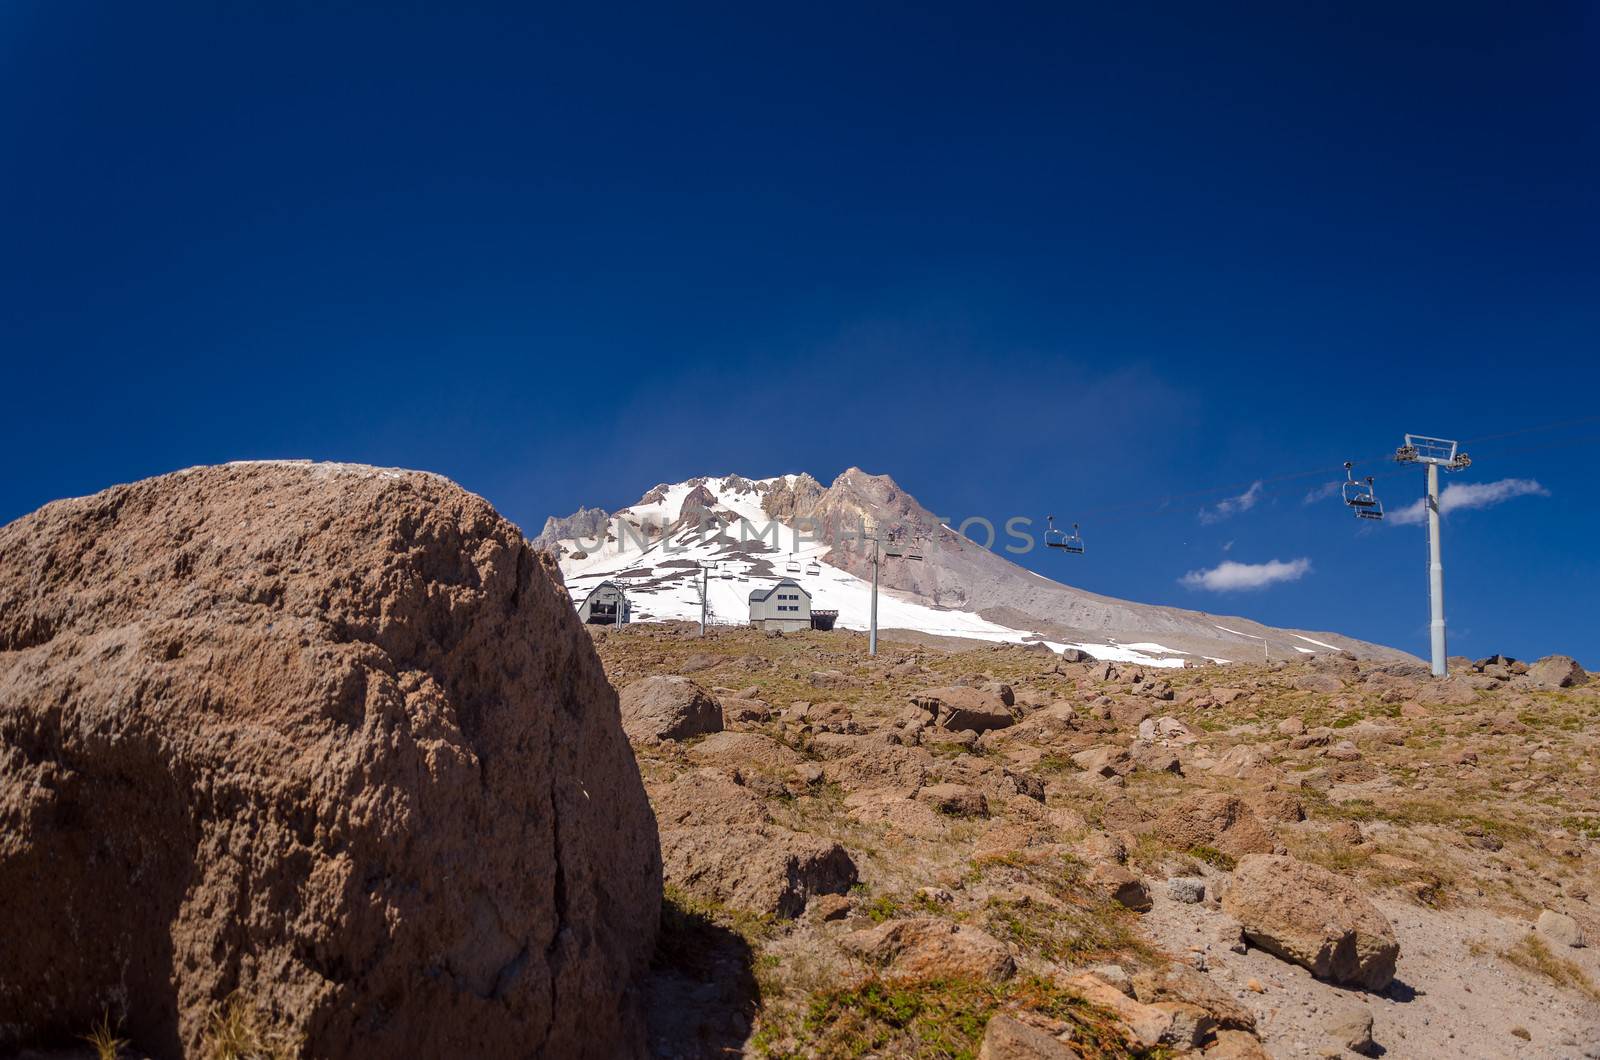 View of the summit of Mount Hood with a boulder in the foreground